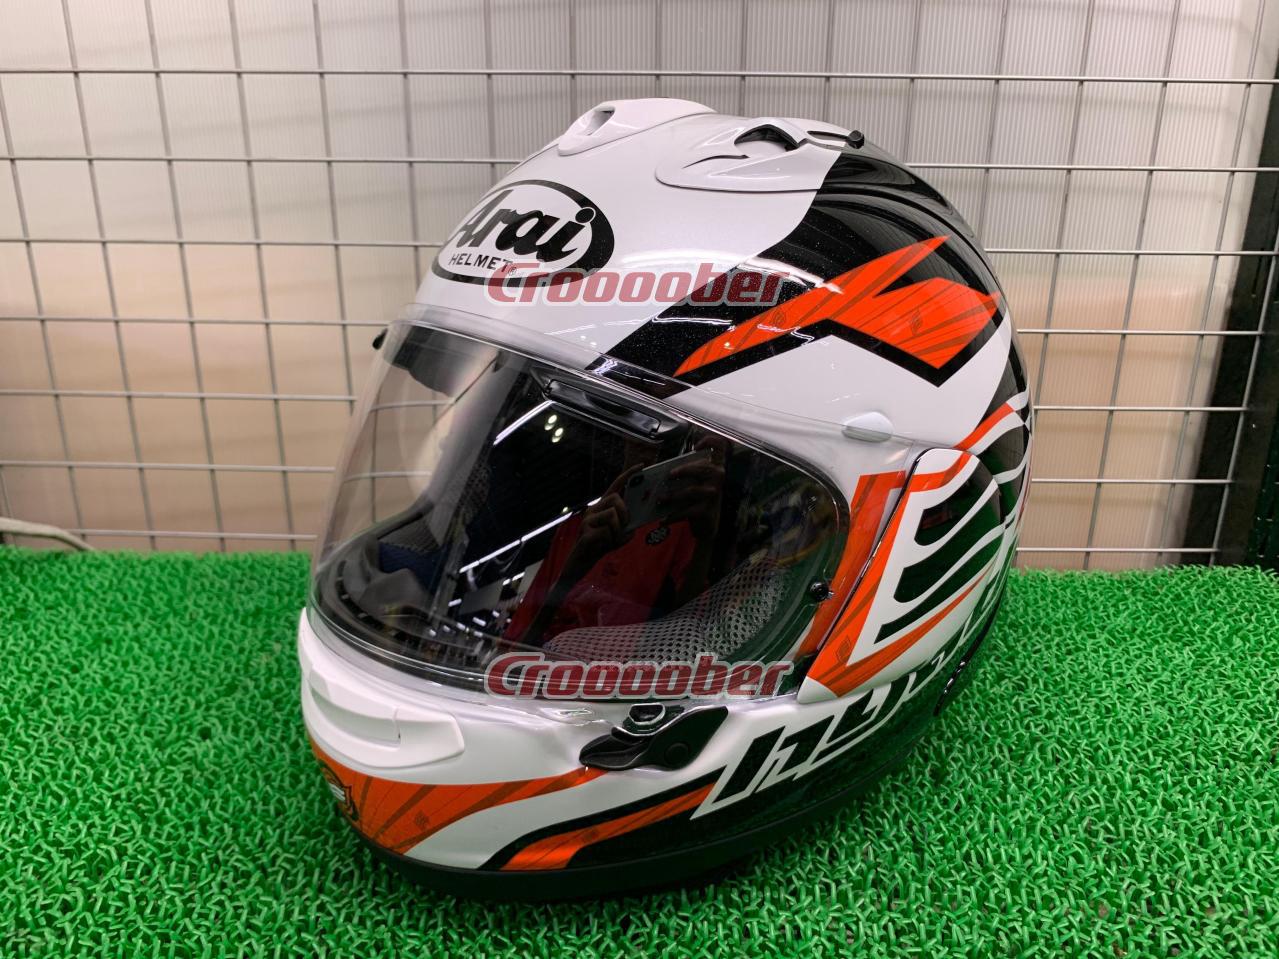 Size: L / 59 - 60 Cm / Arai / HYOD RX-7X Grenade Limited Number Of